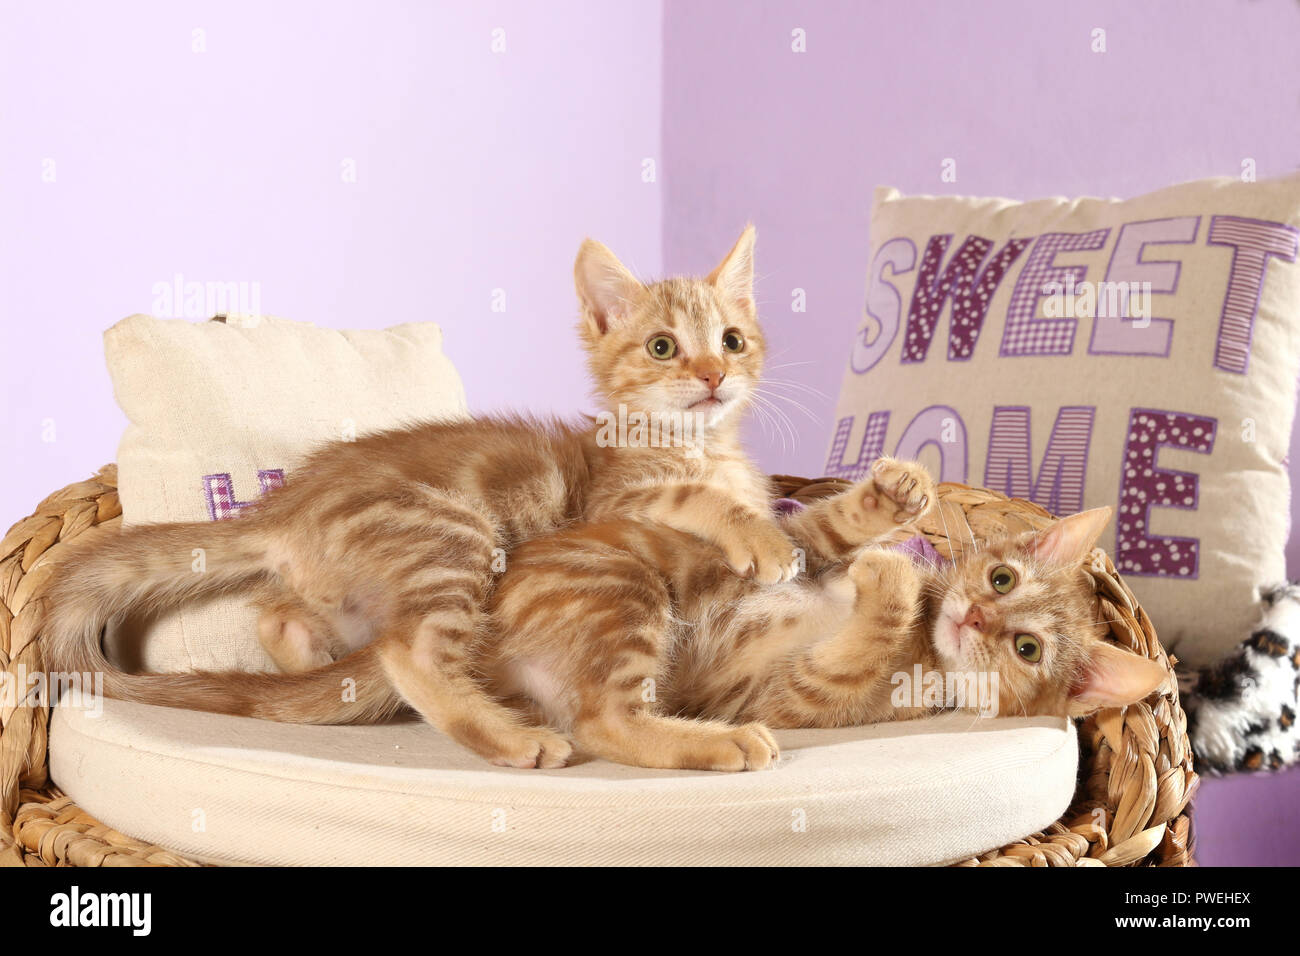 Deux chatons domestiques, red tabby, 7 semaines Banque D'Images